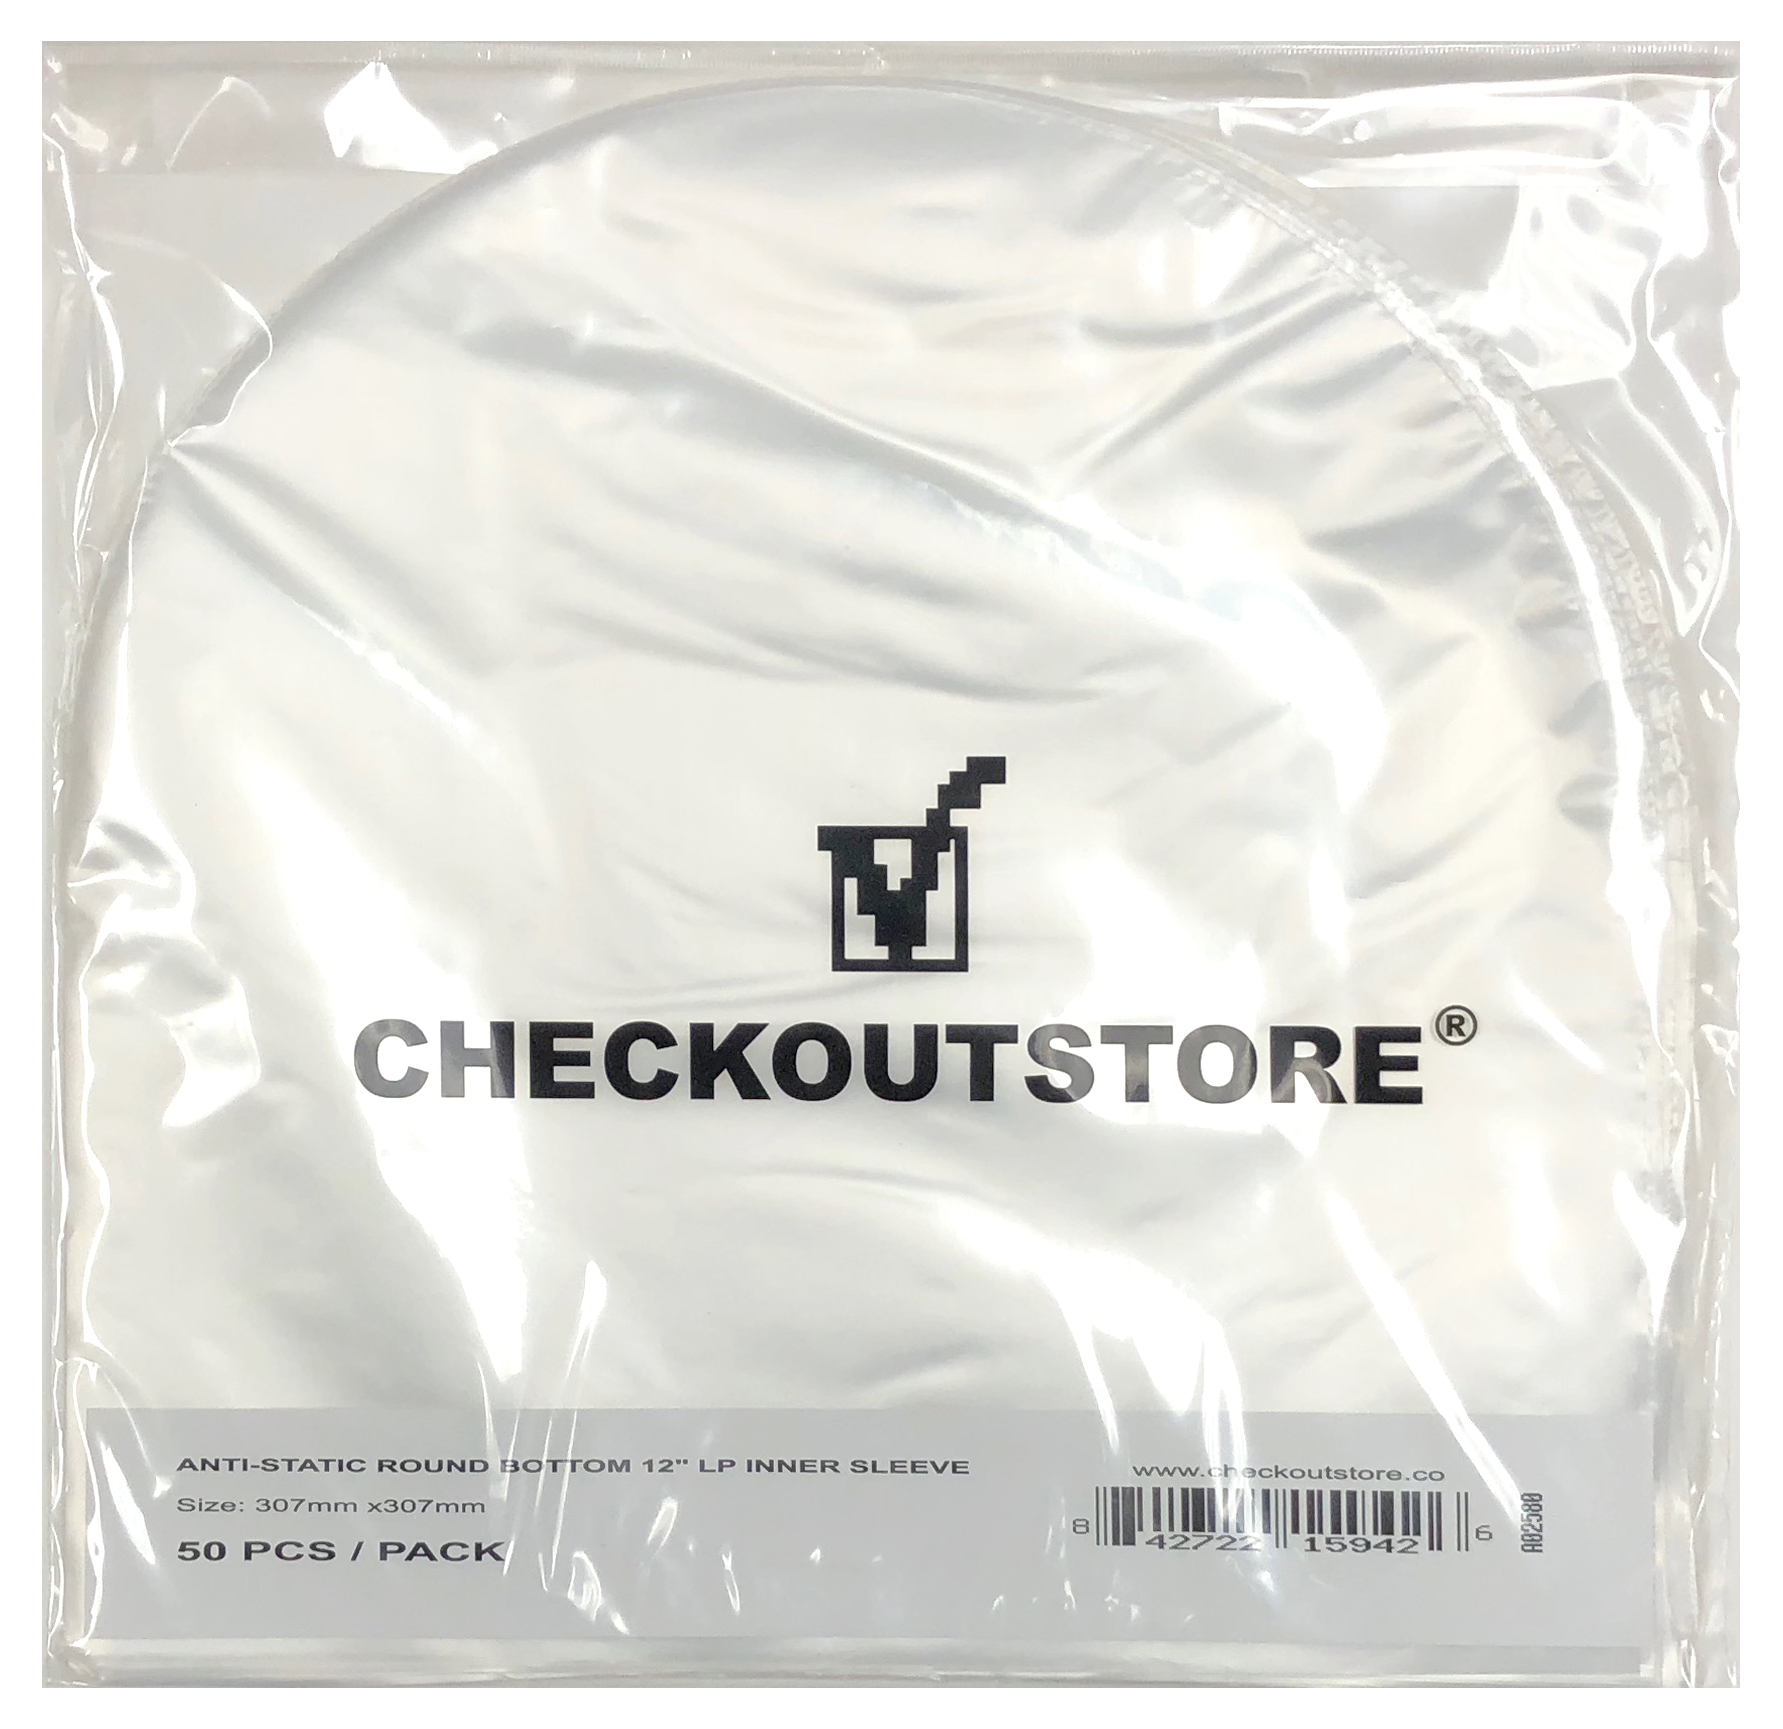 Image of ID 1214260953 1000 CheckOutStore Anti Static Round Bottom Semi-transparent for 12" LP Vinyl 33 RPM (Inner Sleeves)